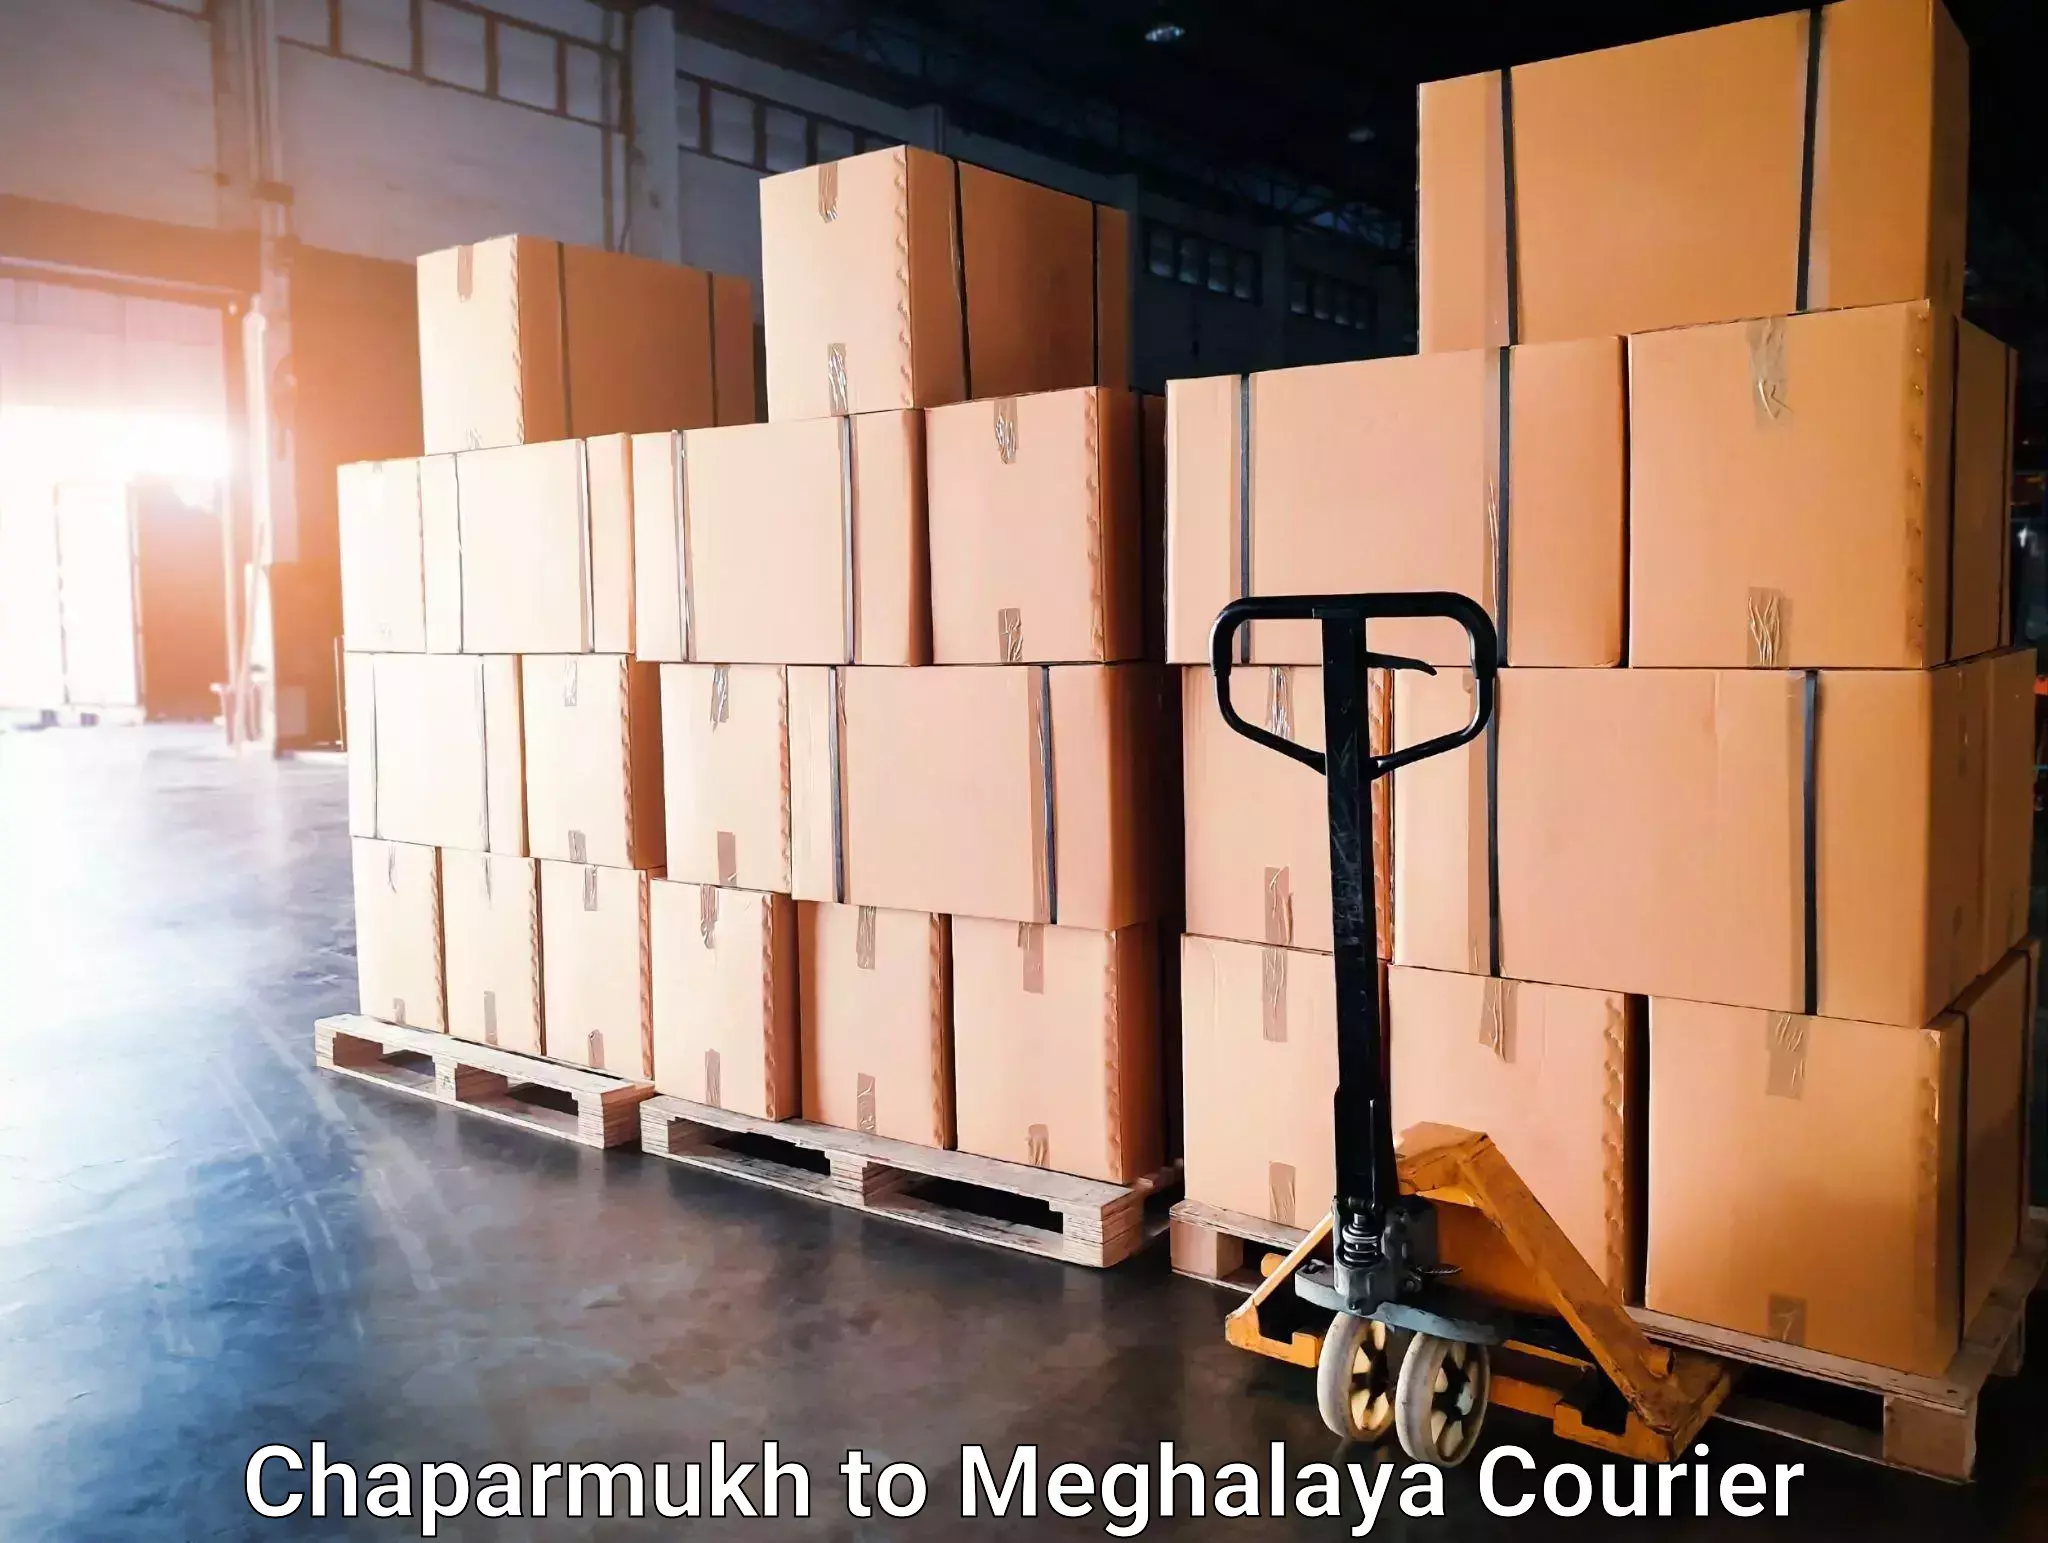 Flexible delivery schedules Chaparmukh to Meghalaya